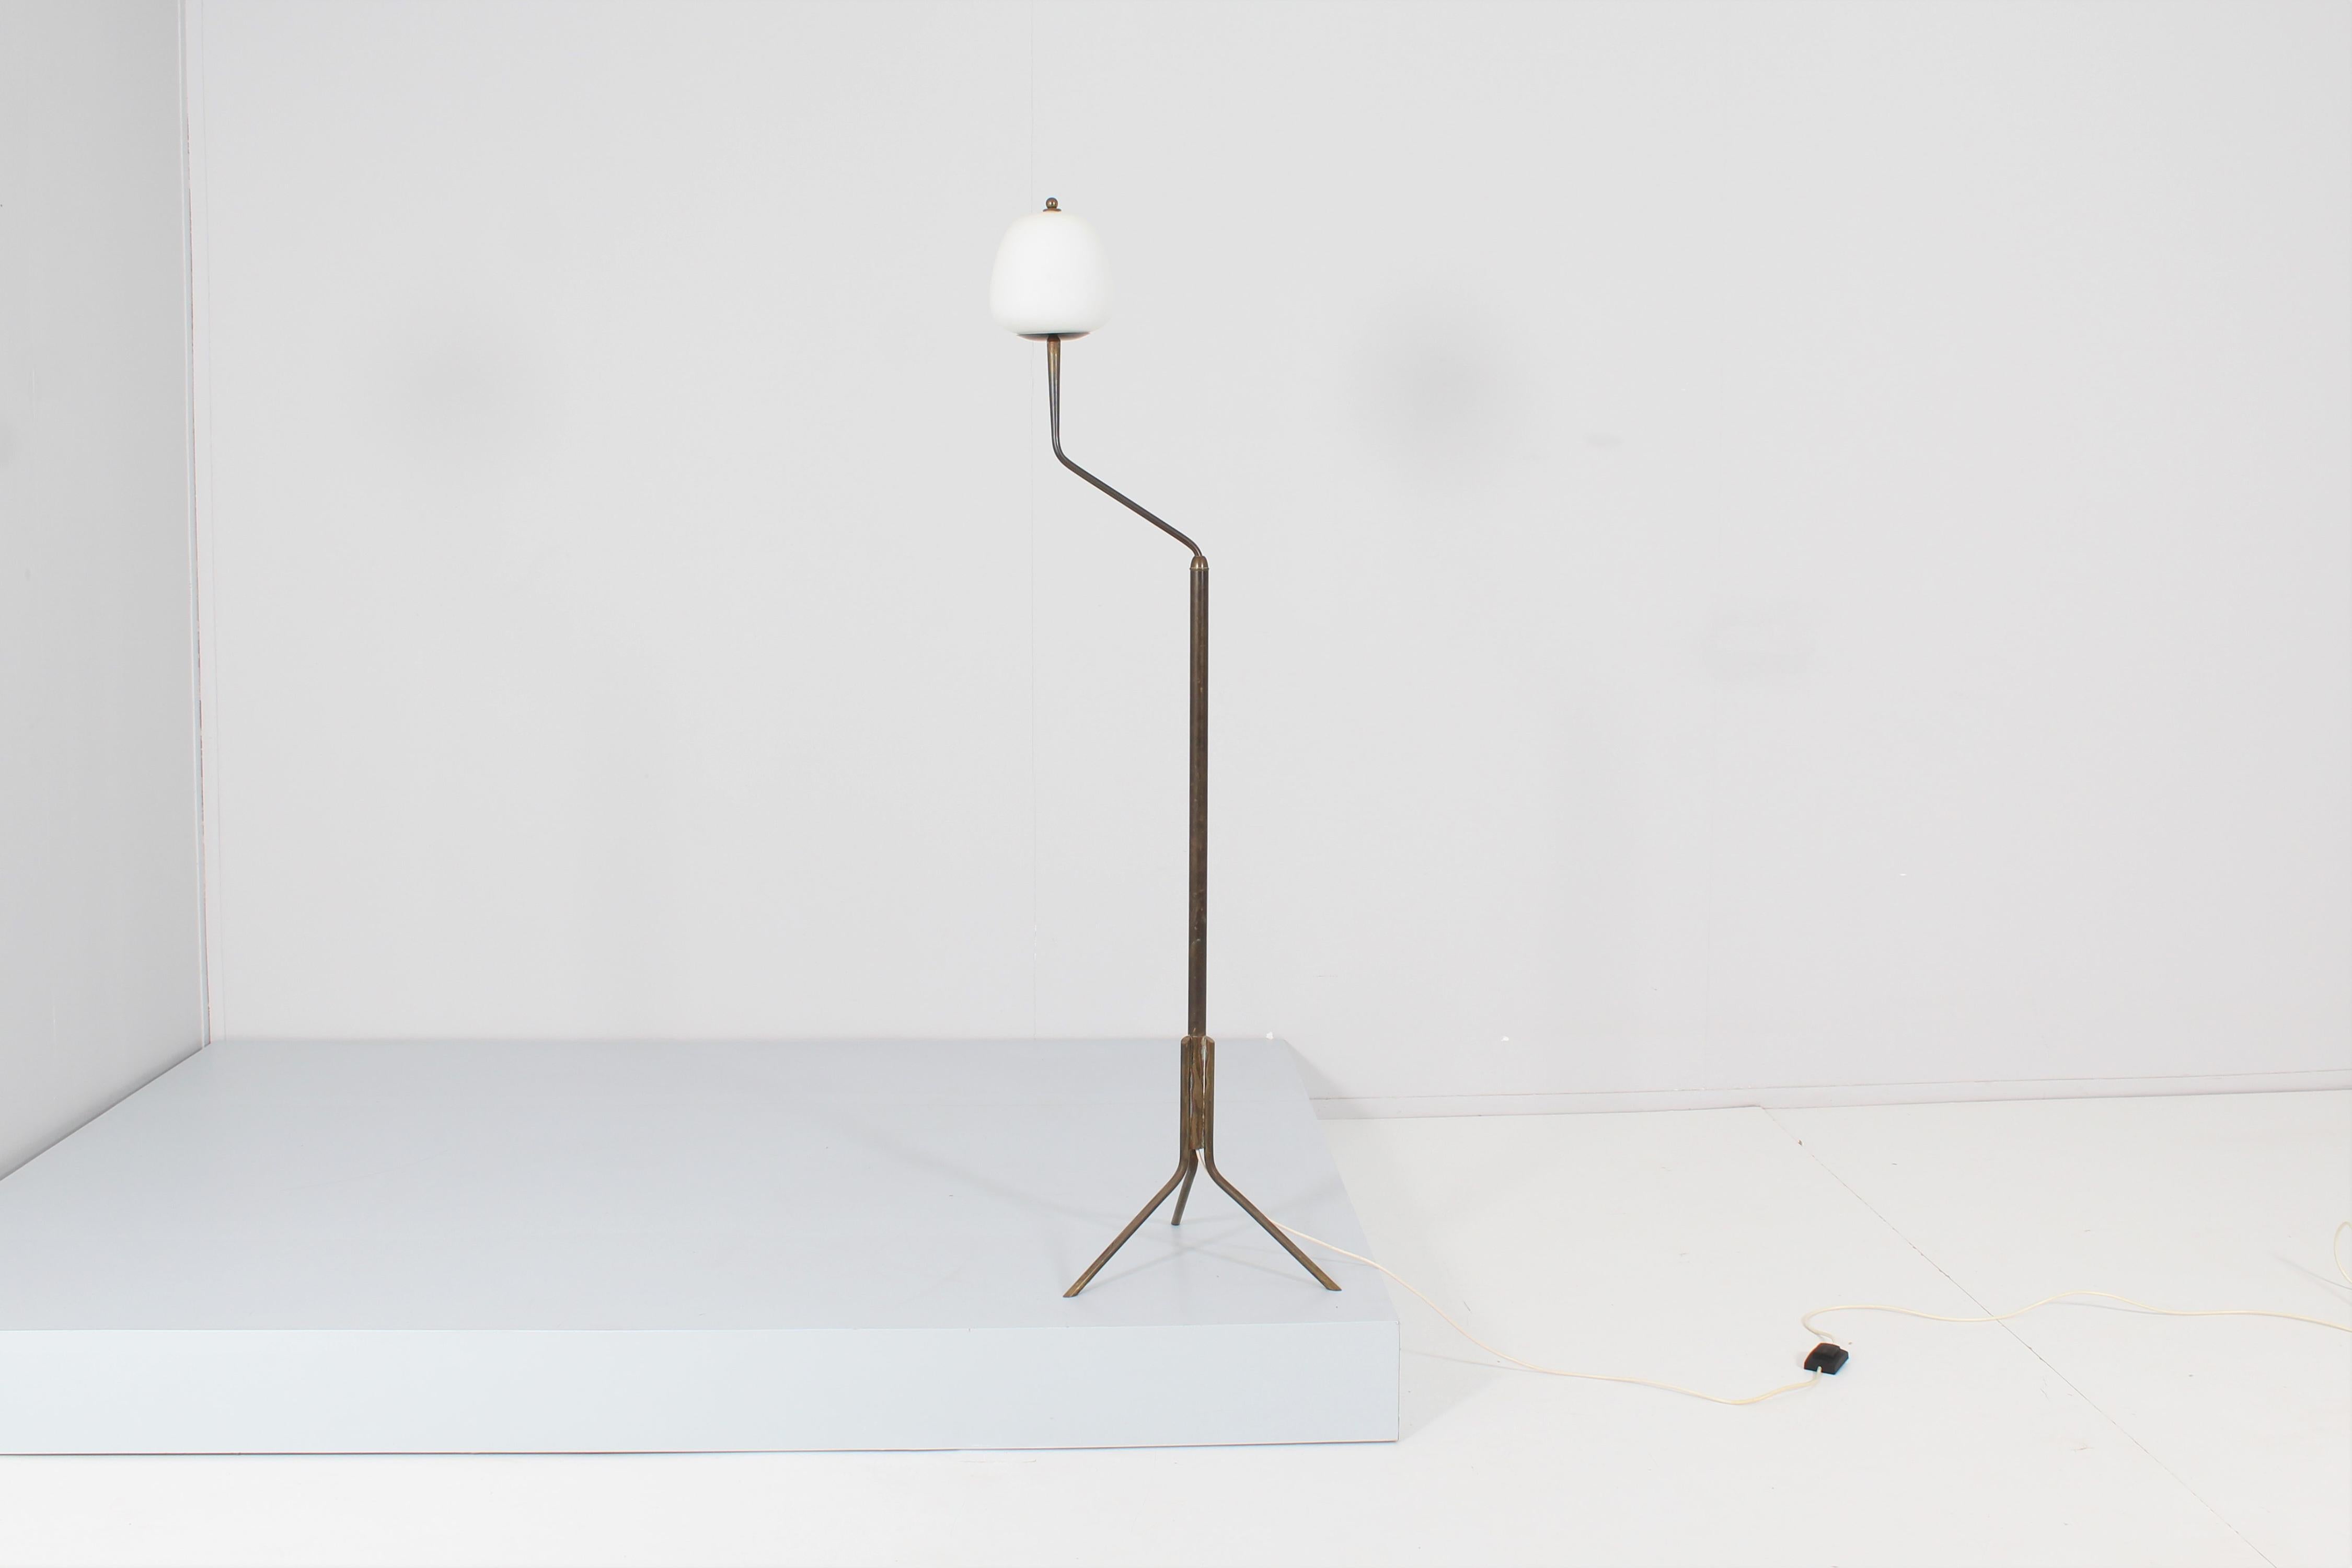 Beautiful floor lamp attributed to Ignazio Gardella, produced in Italy in the 1960s. The lamp, adjustable by means of a joint, is made of burnished brass and a globe in satin white glass.
Wear consistent with age and use.